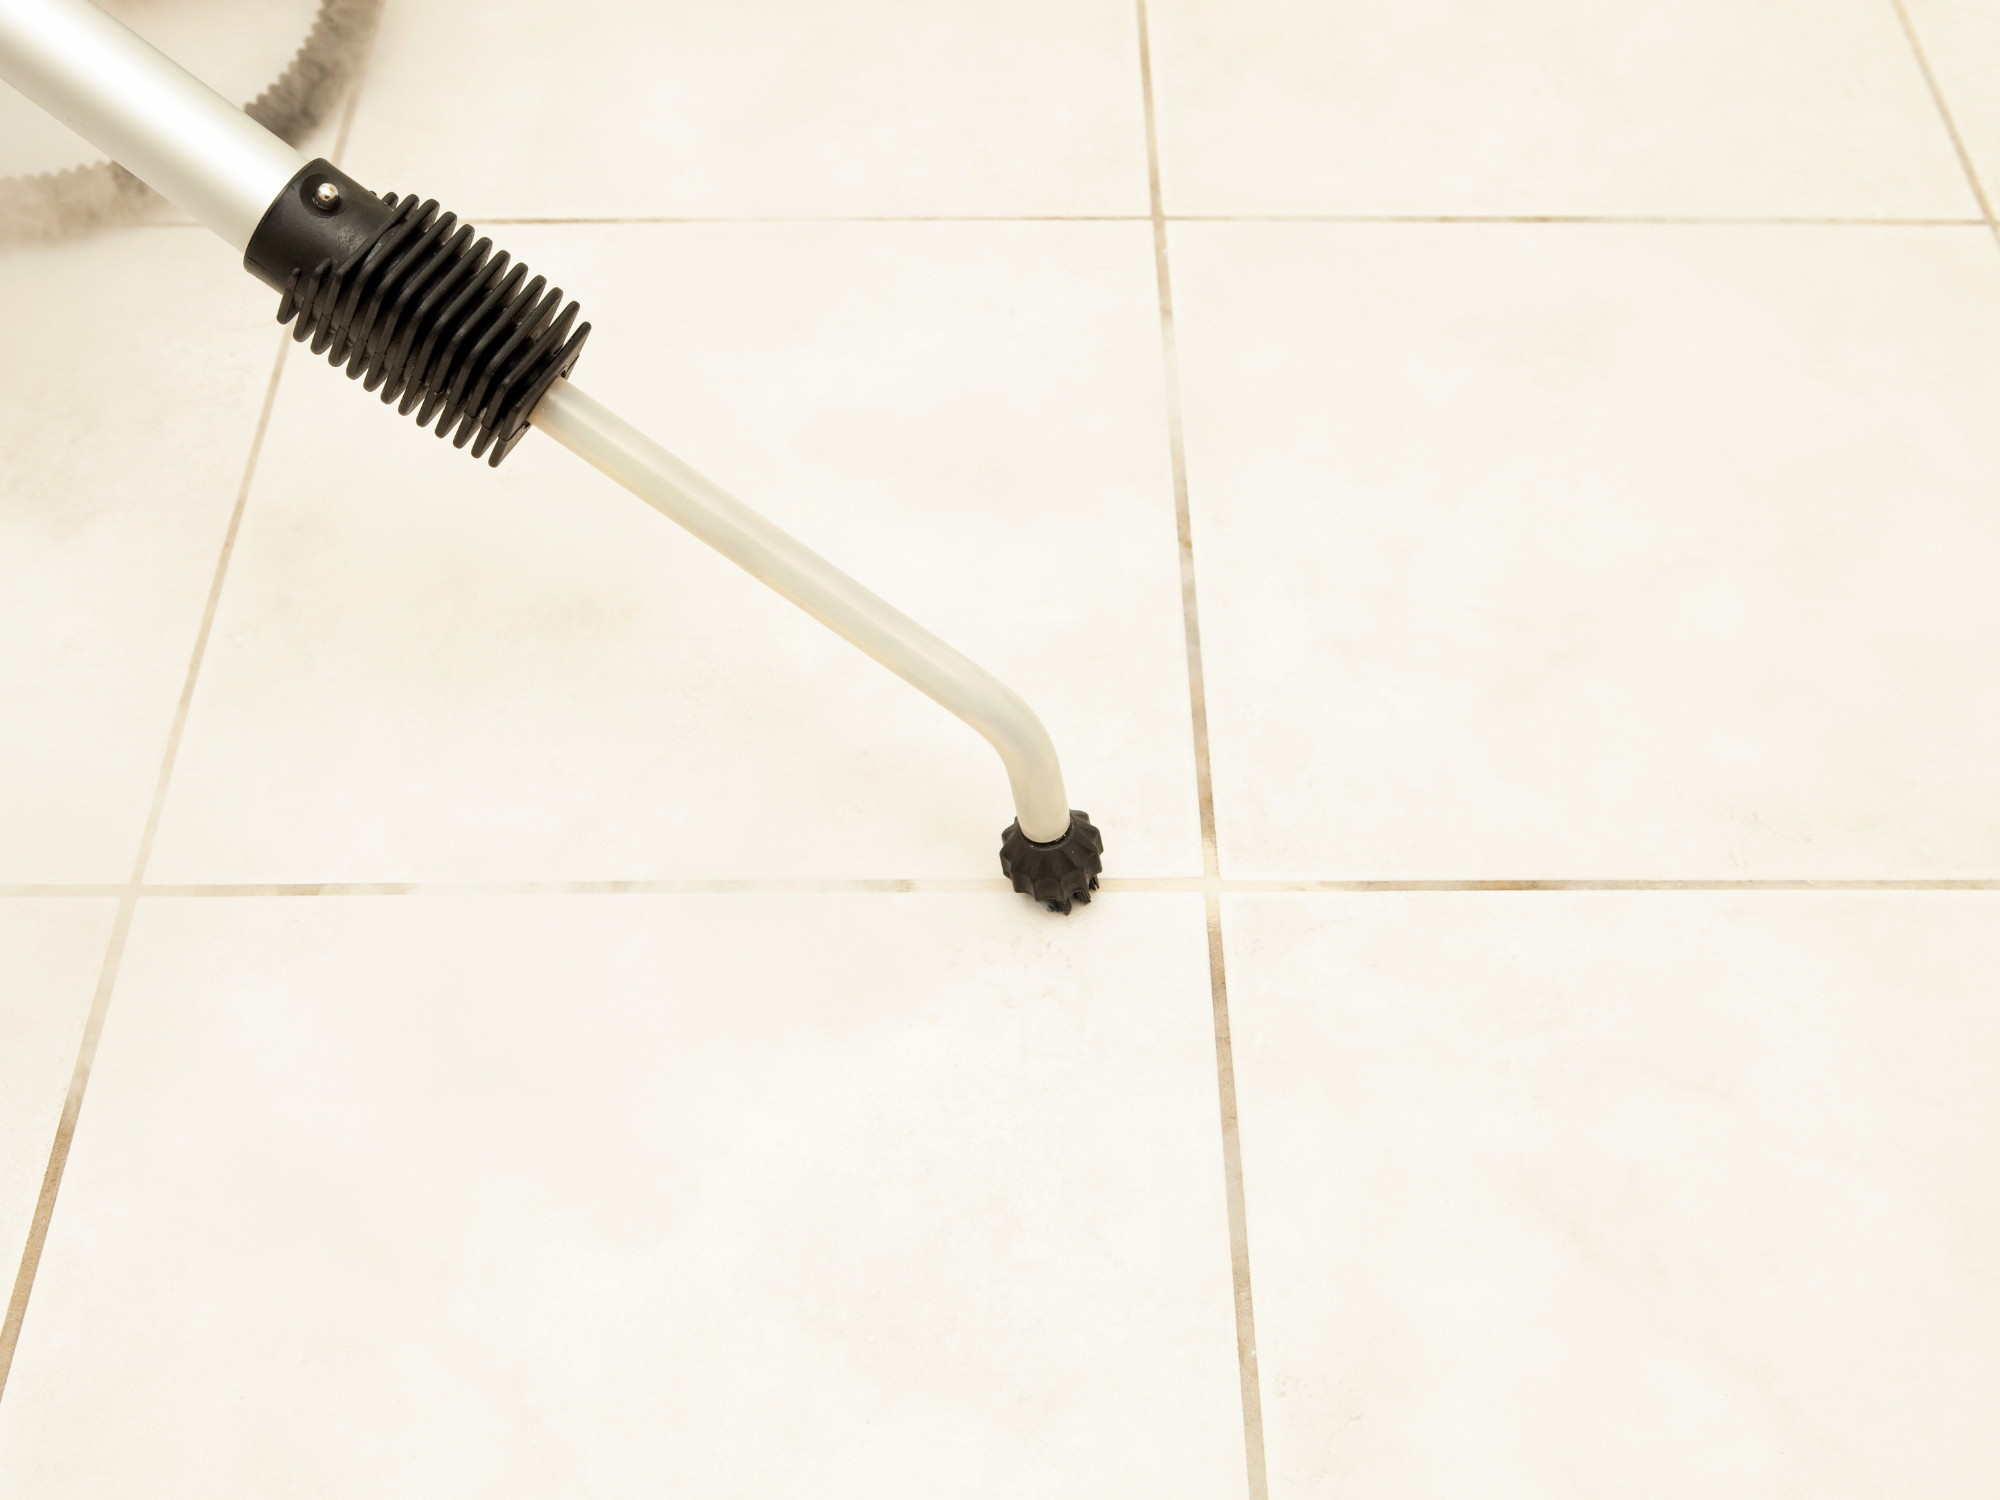 Grout and tiling